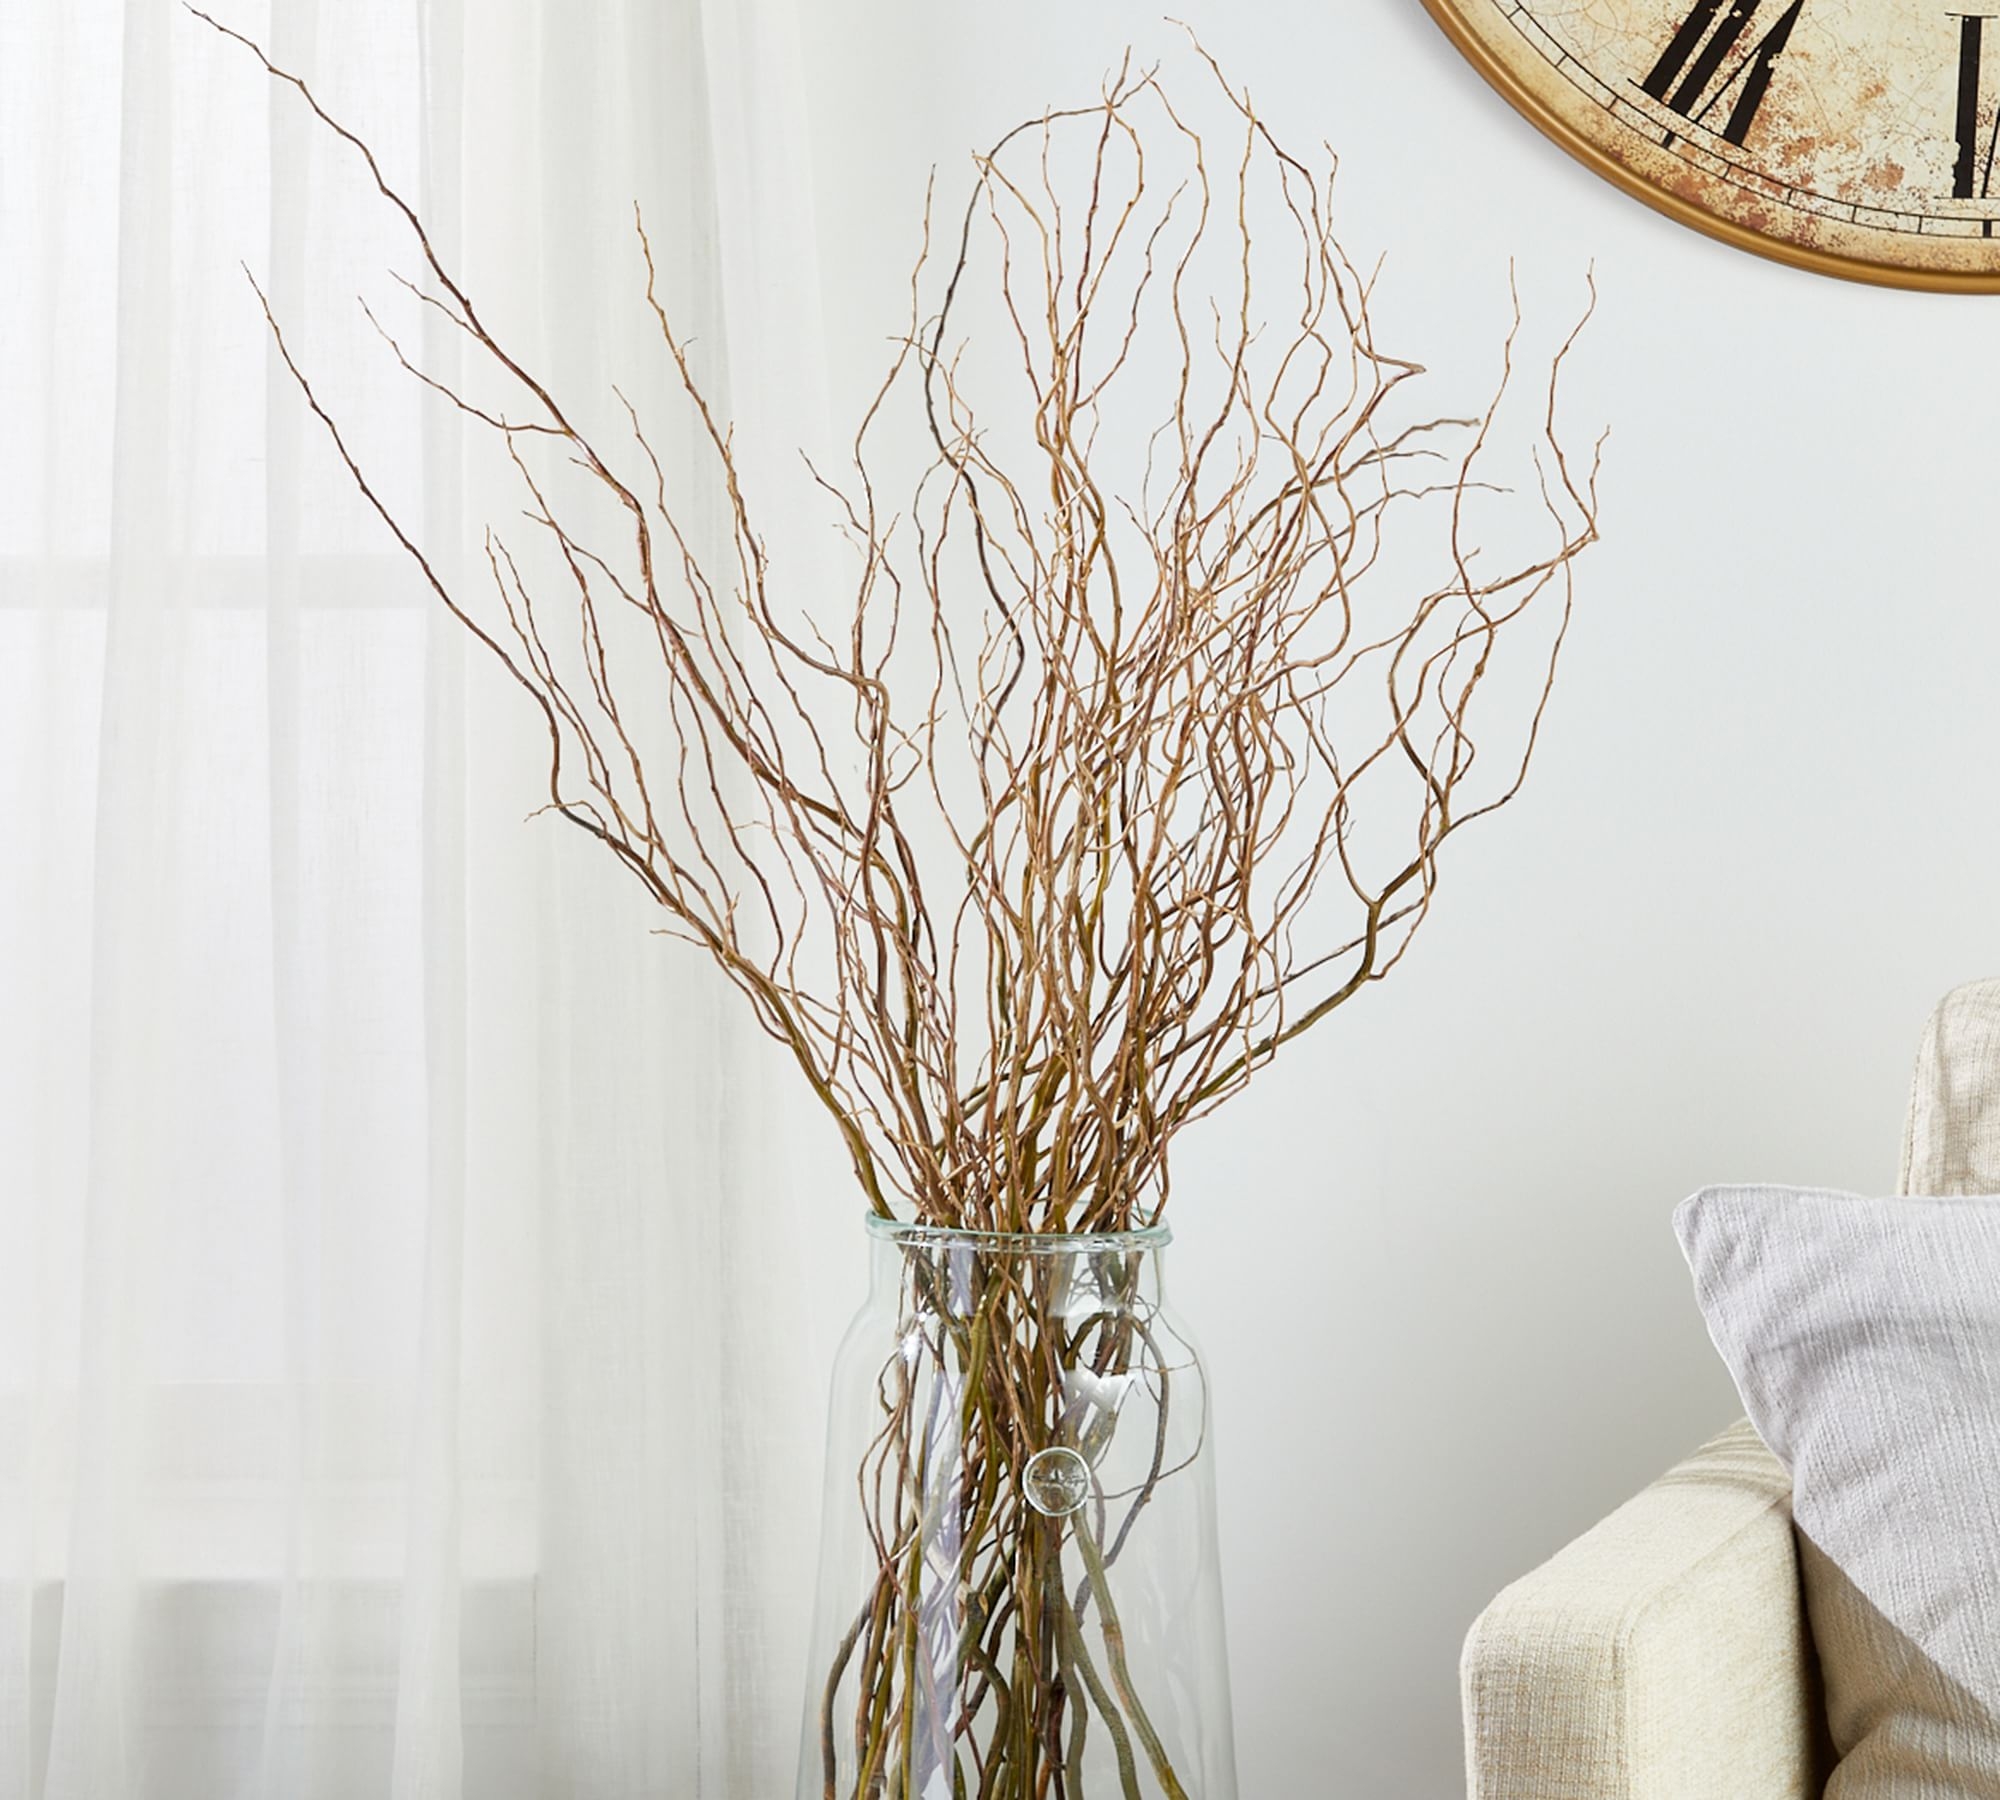 Live Curly Willow Branches, 3 Bunches - Image 0